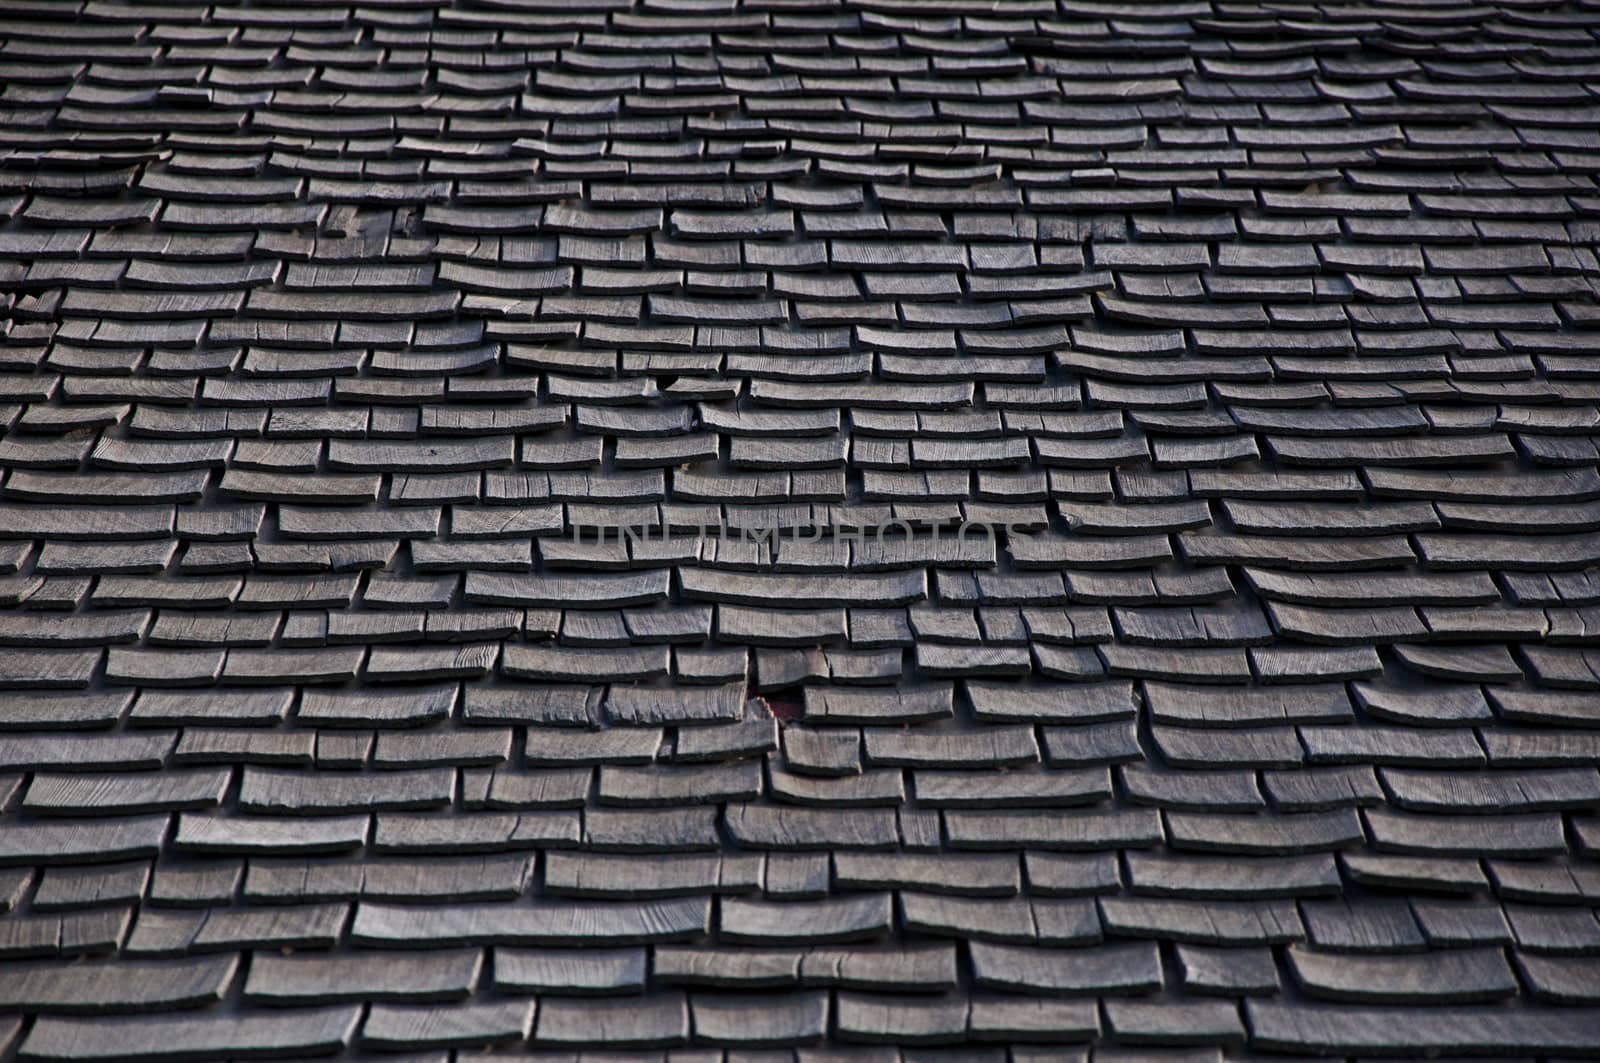 The texture of wooden roof shingles makes a nice background image.